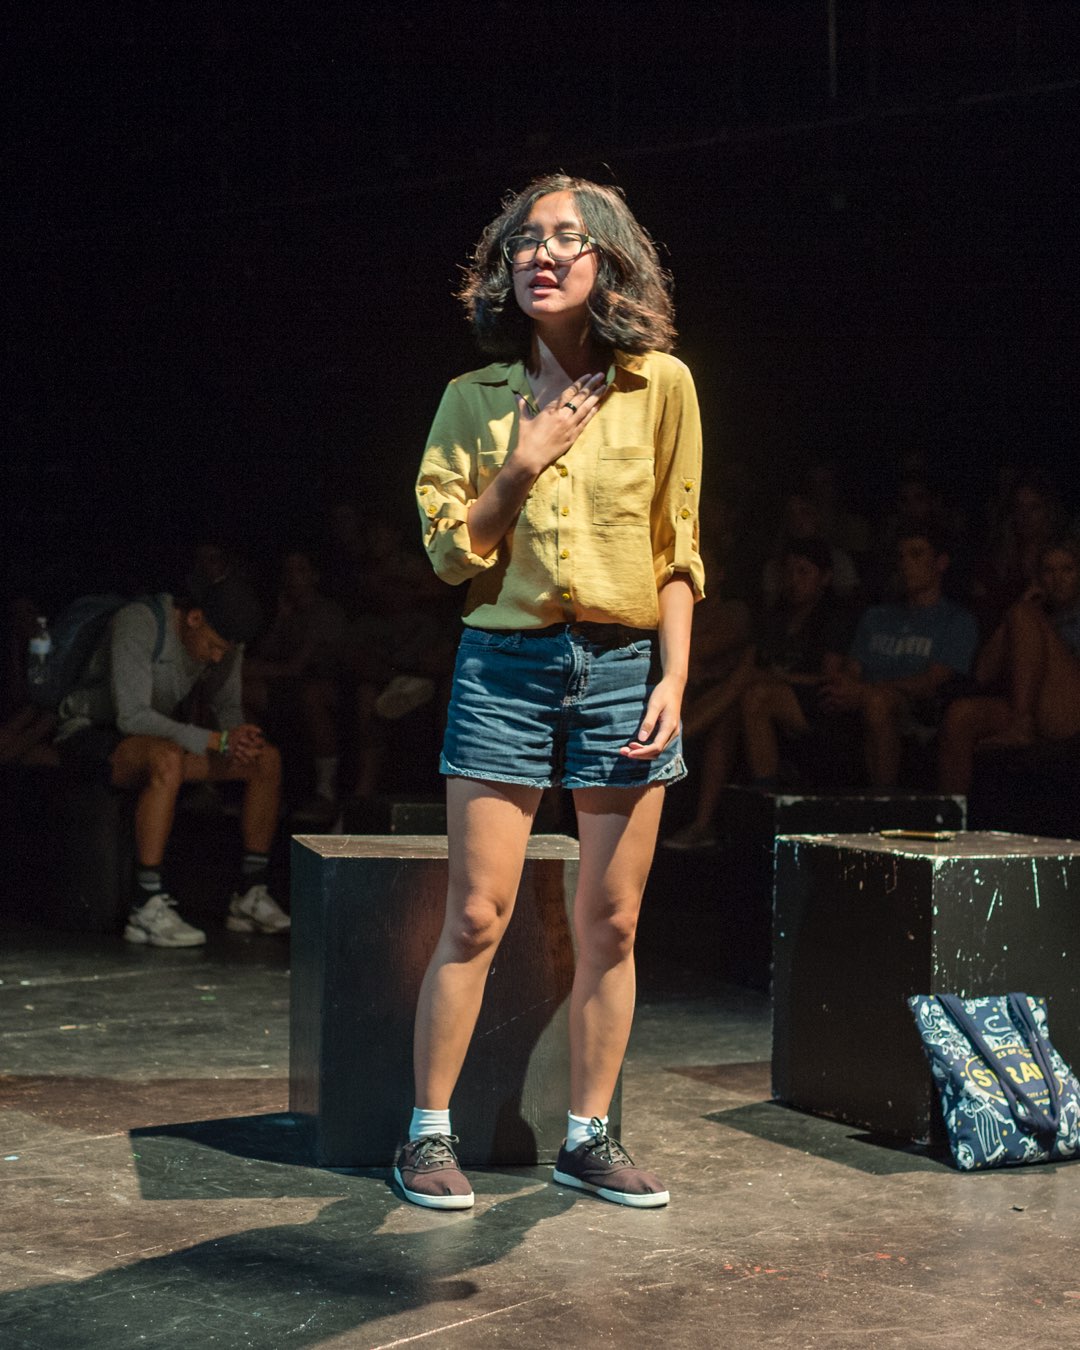 A female student in glasses with a yellow shirt and denim shorts, speaking with her hand against her chest